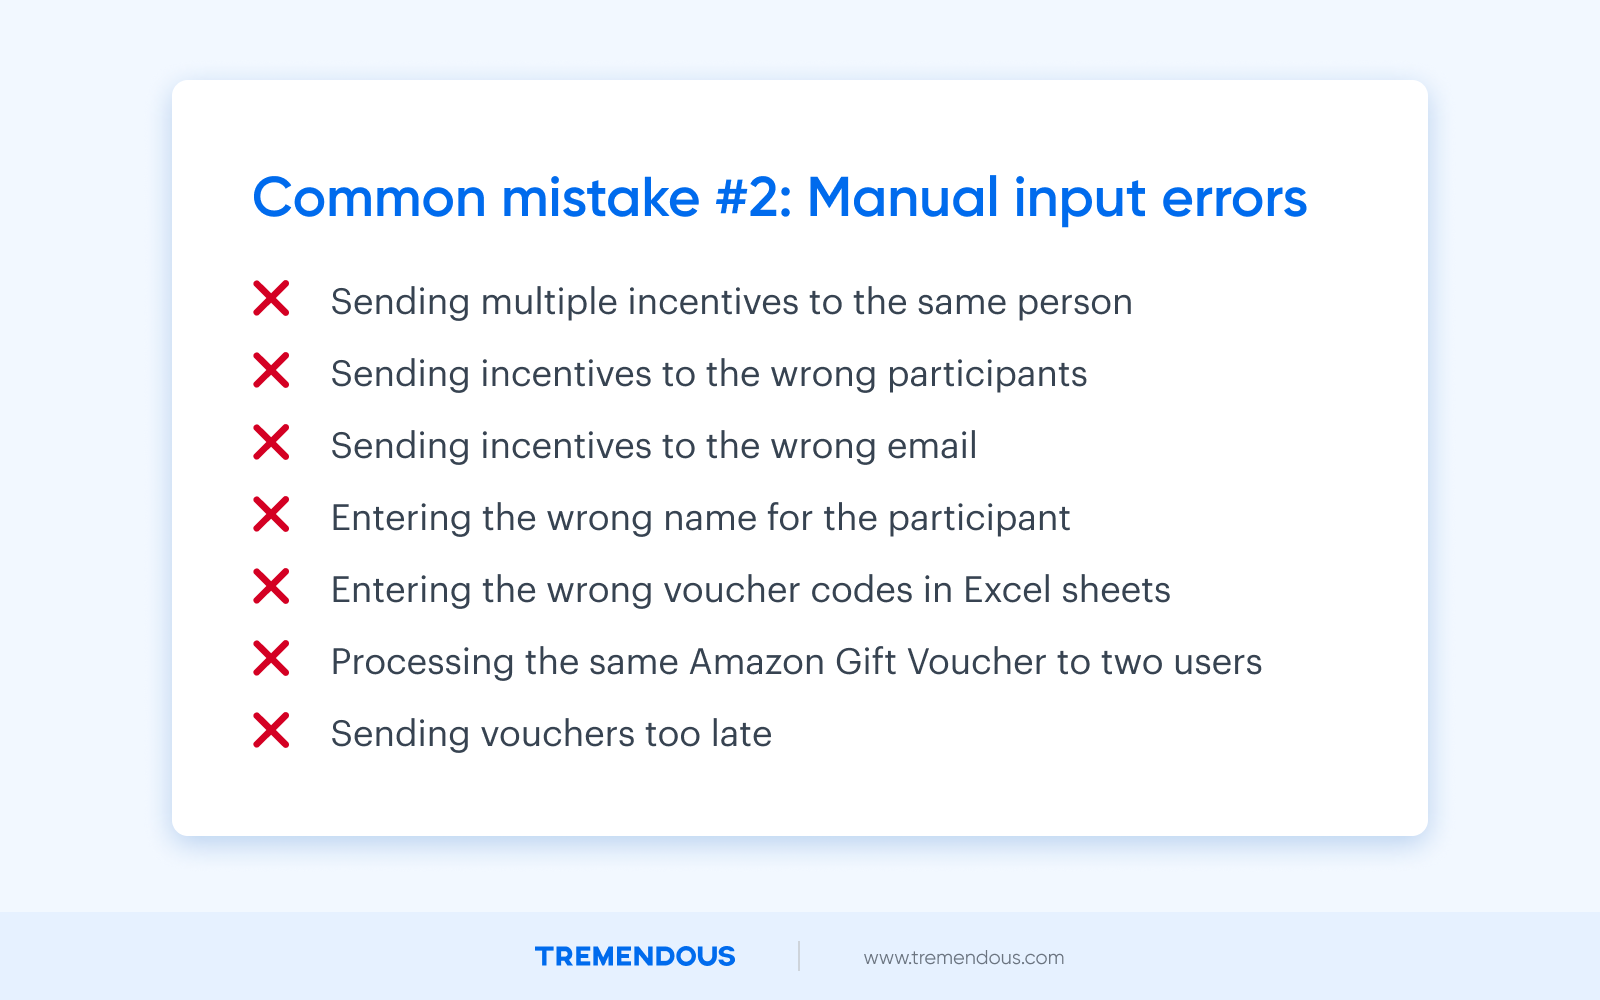 A graphic list that states, "Common mistake #2: Manual input errors." The list reads: "Sending multiple incentives to the same person, sending incentives to the wrong participants, sending incentives to the wrong email, entering the wrong name for the participant, entering the wrong voucher codes in Excel sheets, processing the same Amazon Gift Voucher to two users, sending vouchers too late."